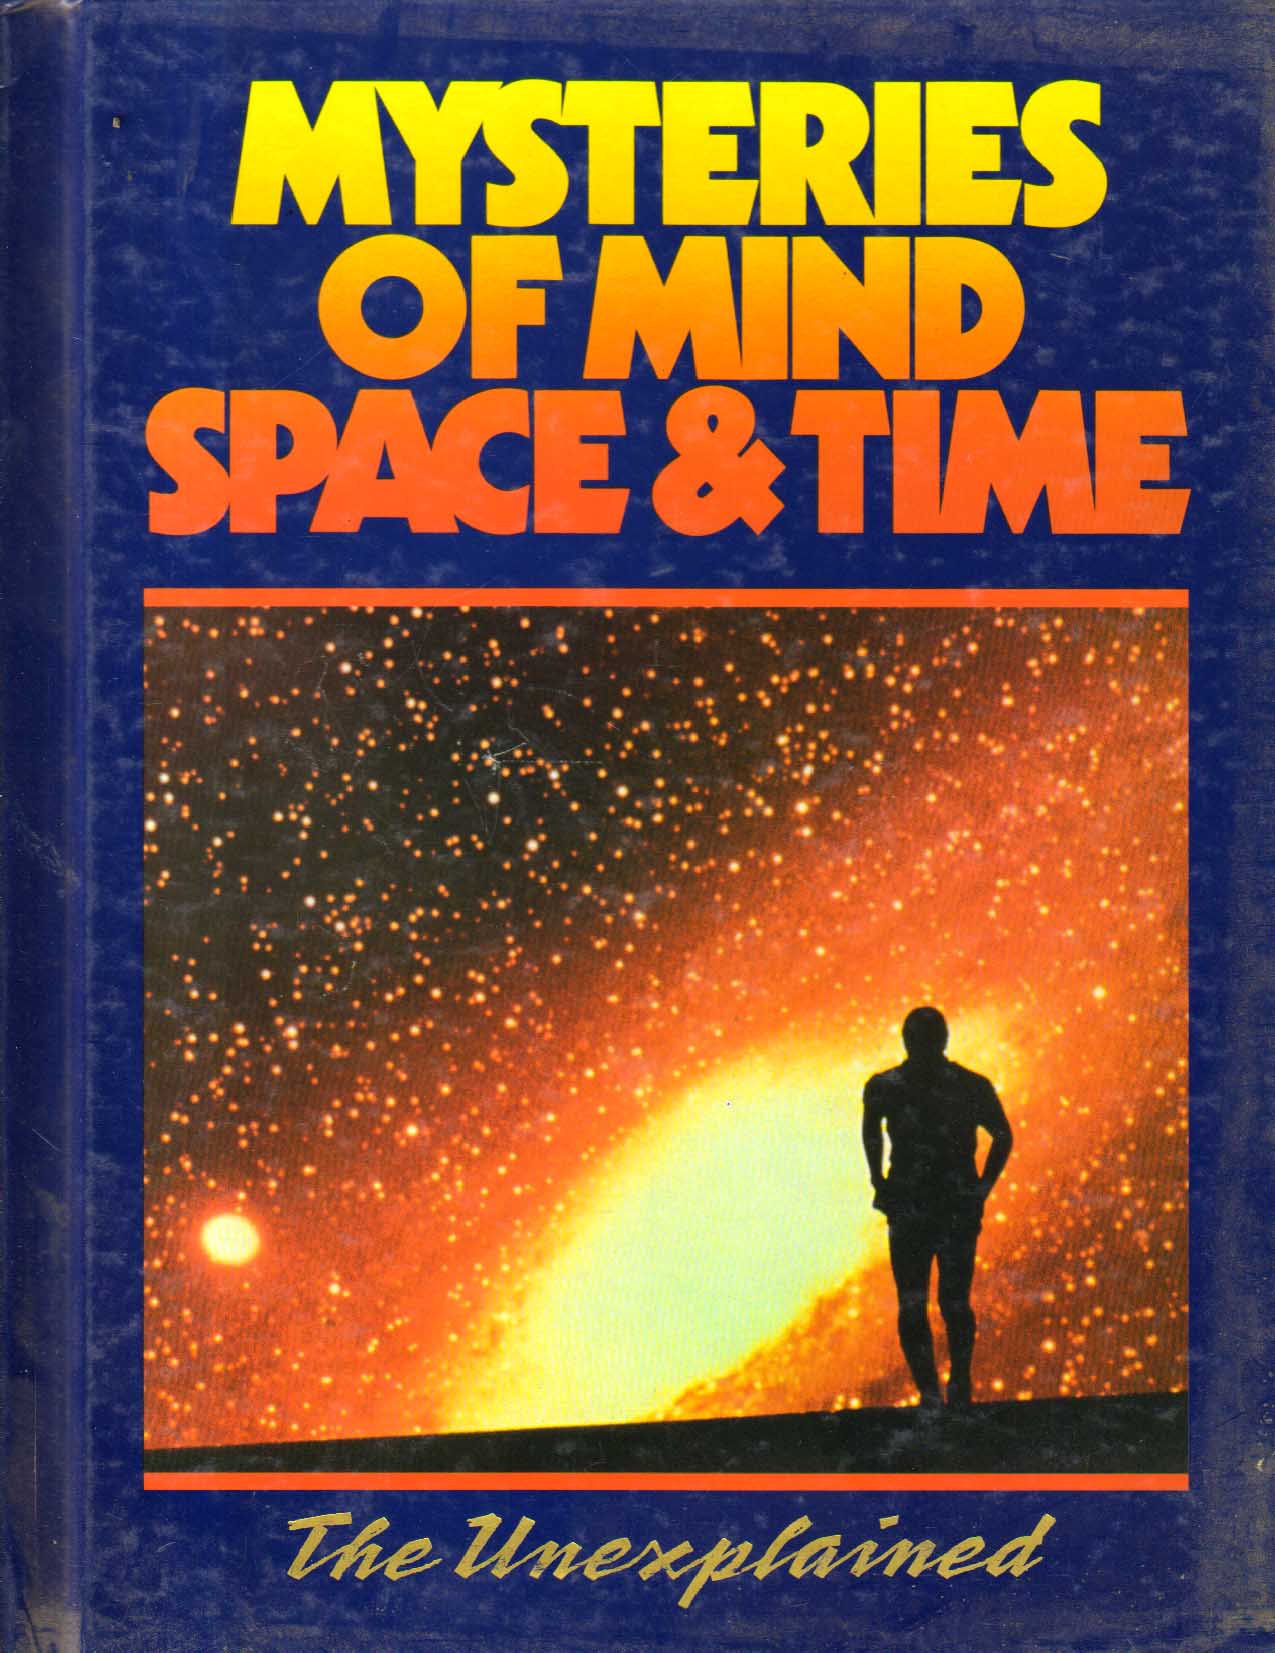 Mysteries of Mind Space & Time Vol 1